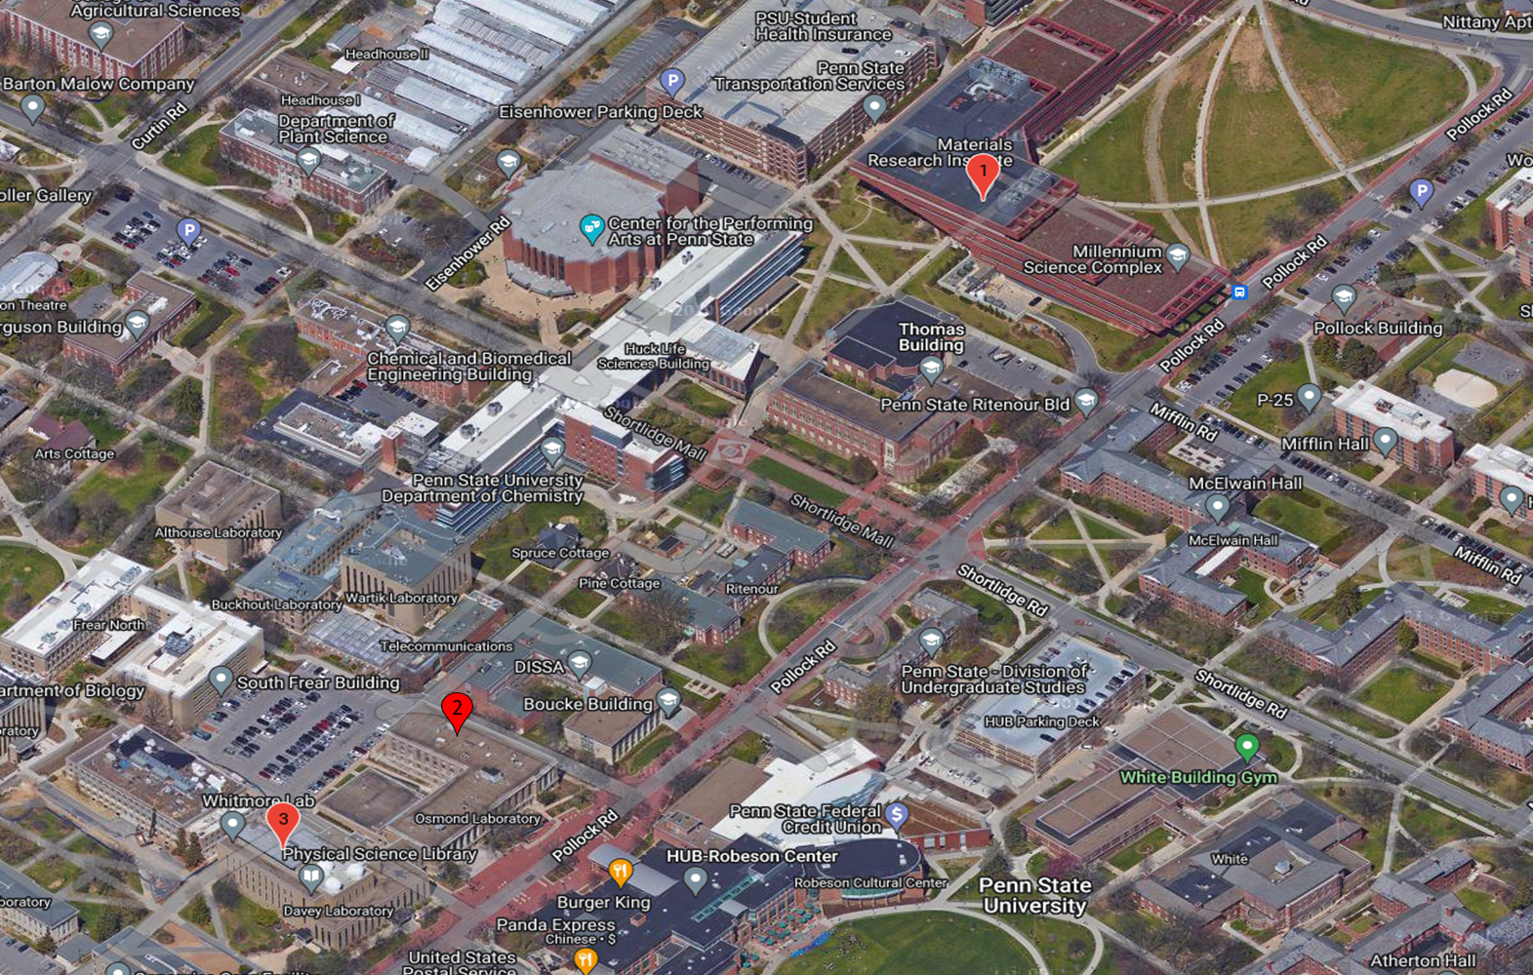 Image of the Penn State University Park campus including three locations of the 2DCC instrumentation (1) Millennium Science Complex, (2) Osmond Laboratory and (3) Davey Laboratory 